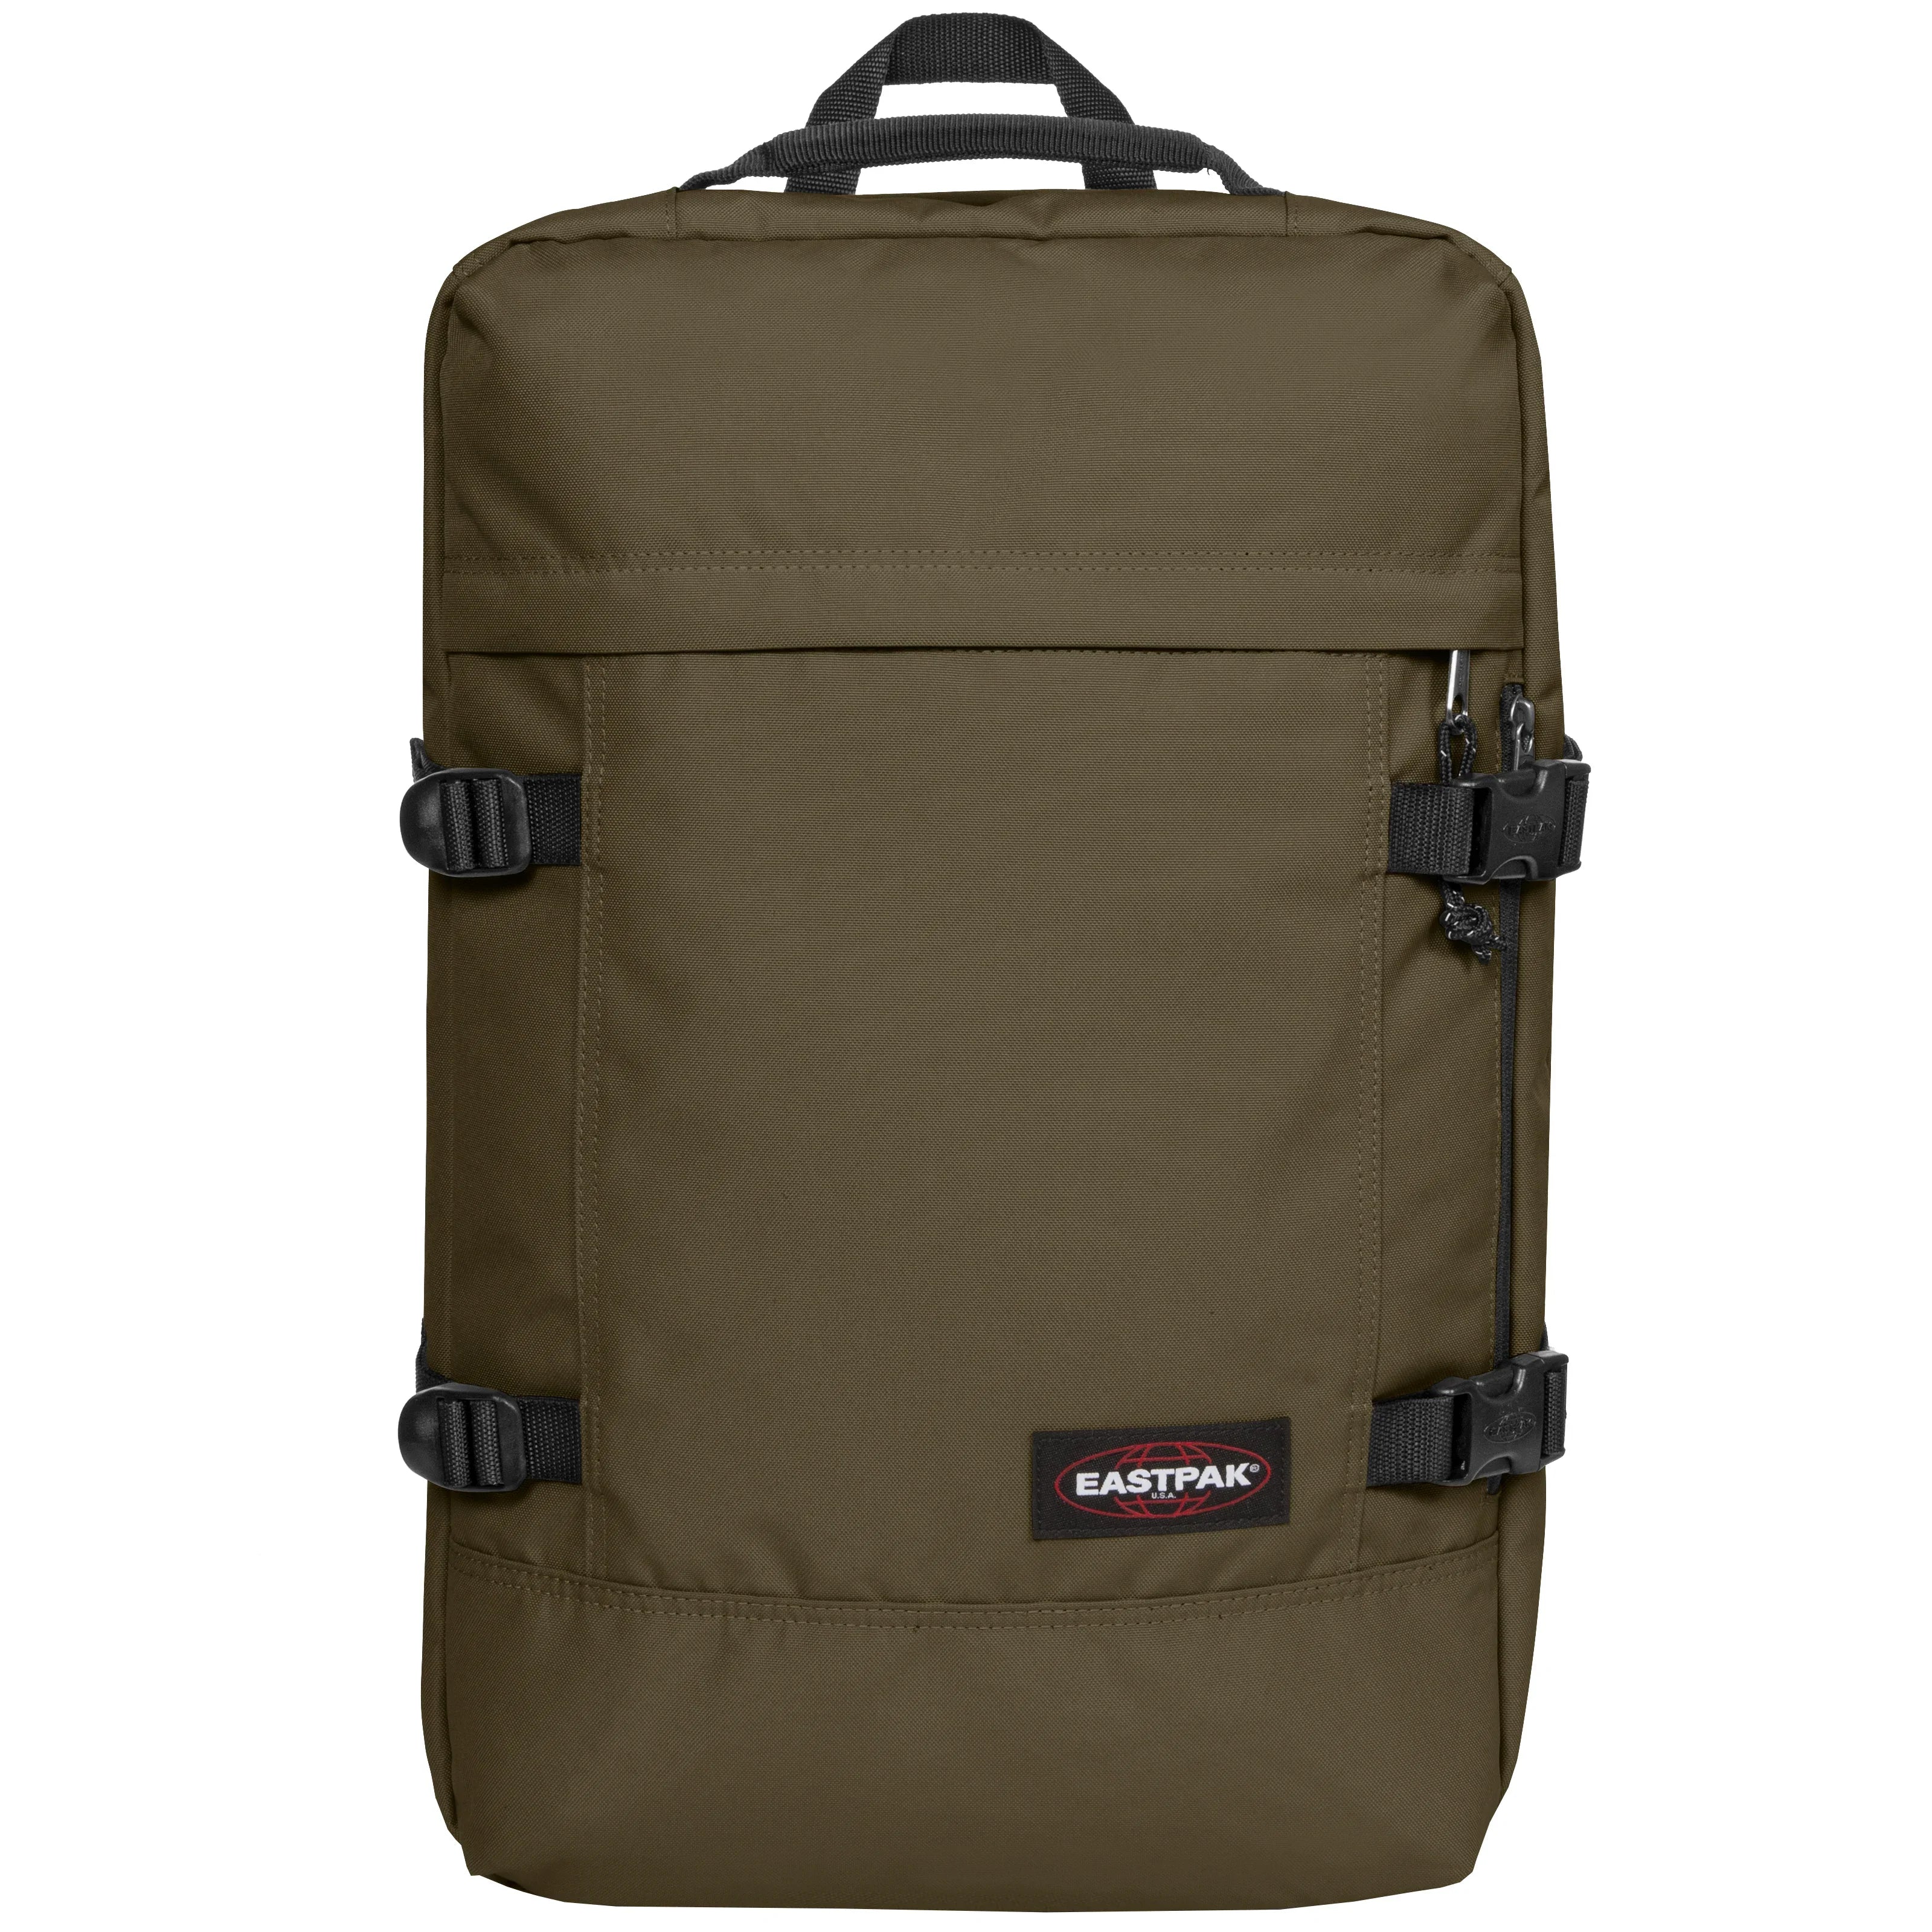 Eastpak Authentic Tranzpack Rucksack 51 cm - Army Olive